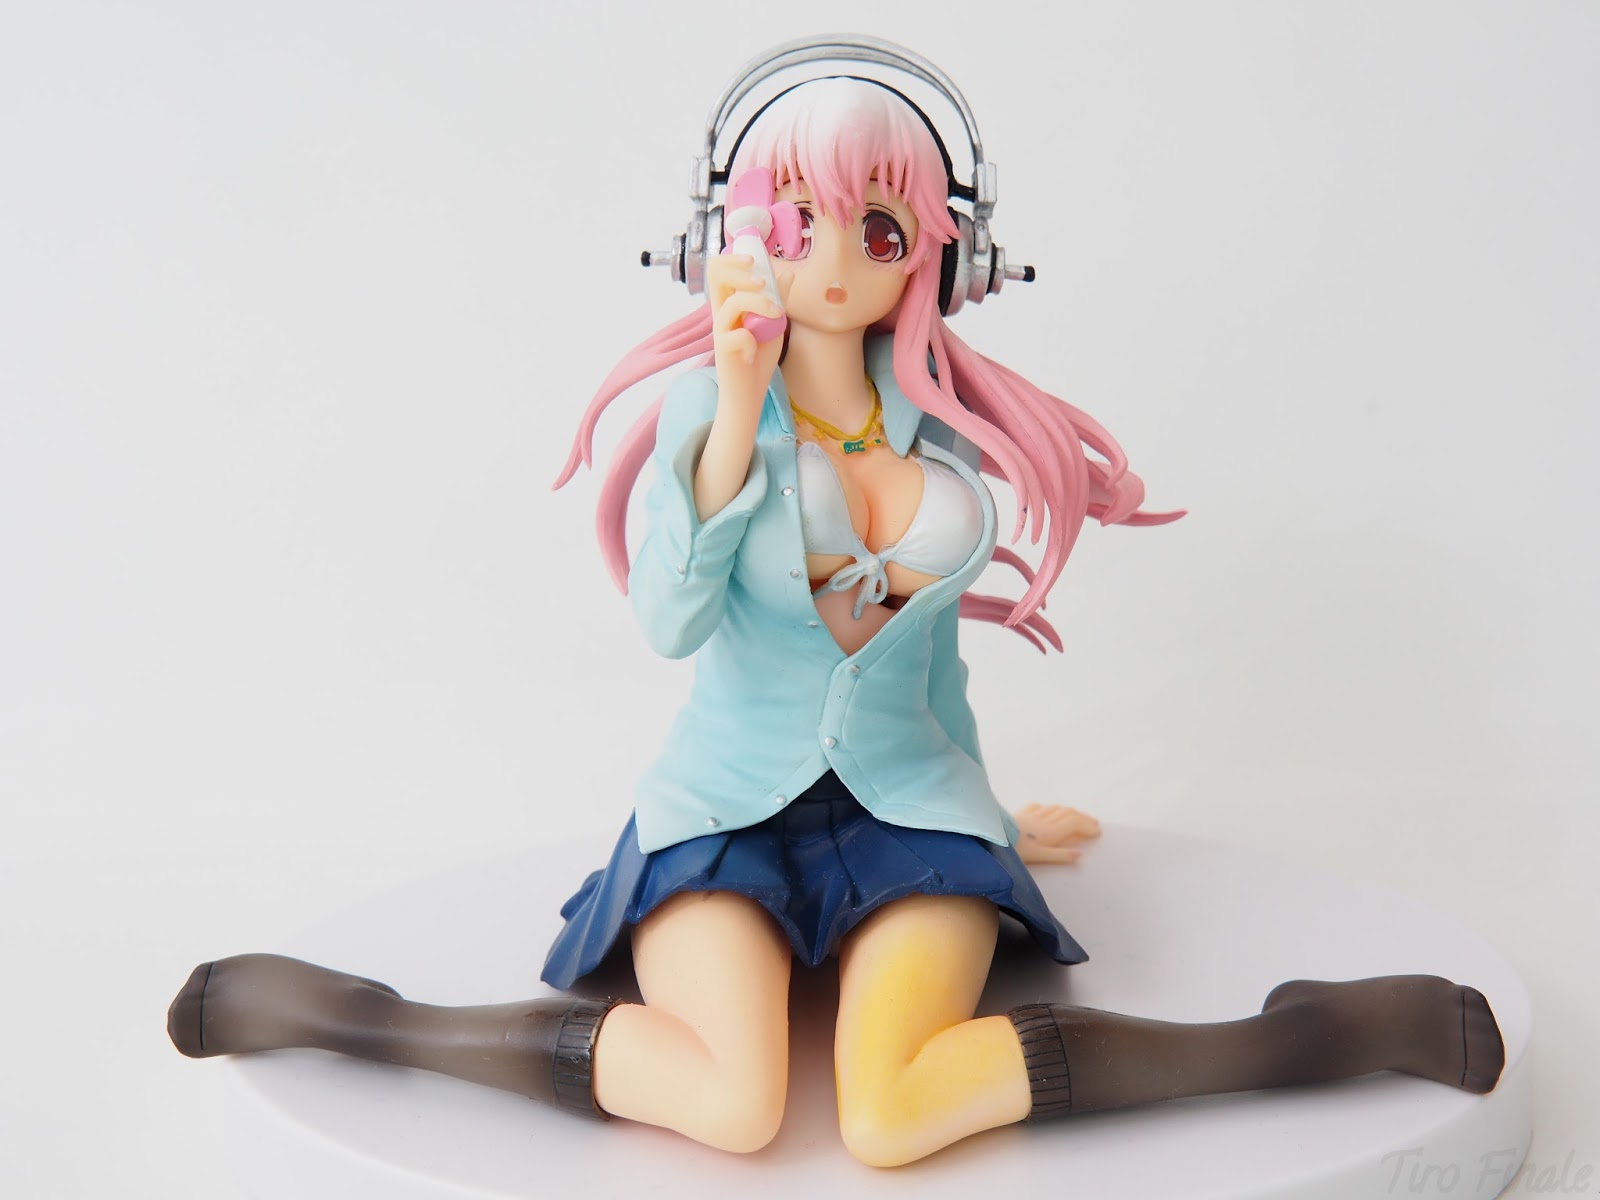 Super Sonico Hot Days Version "Review" .